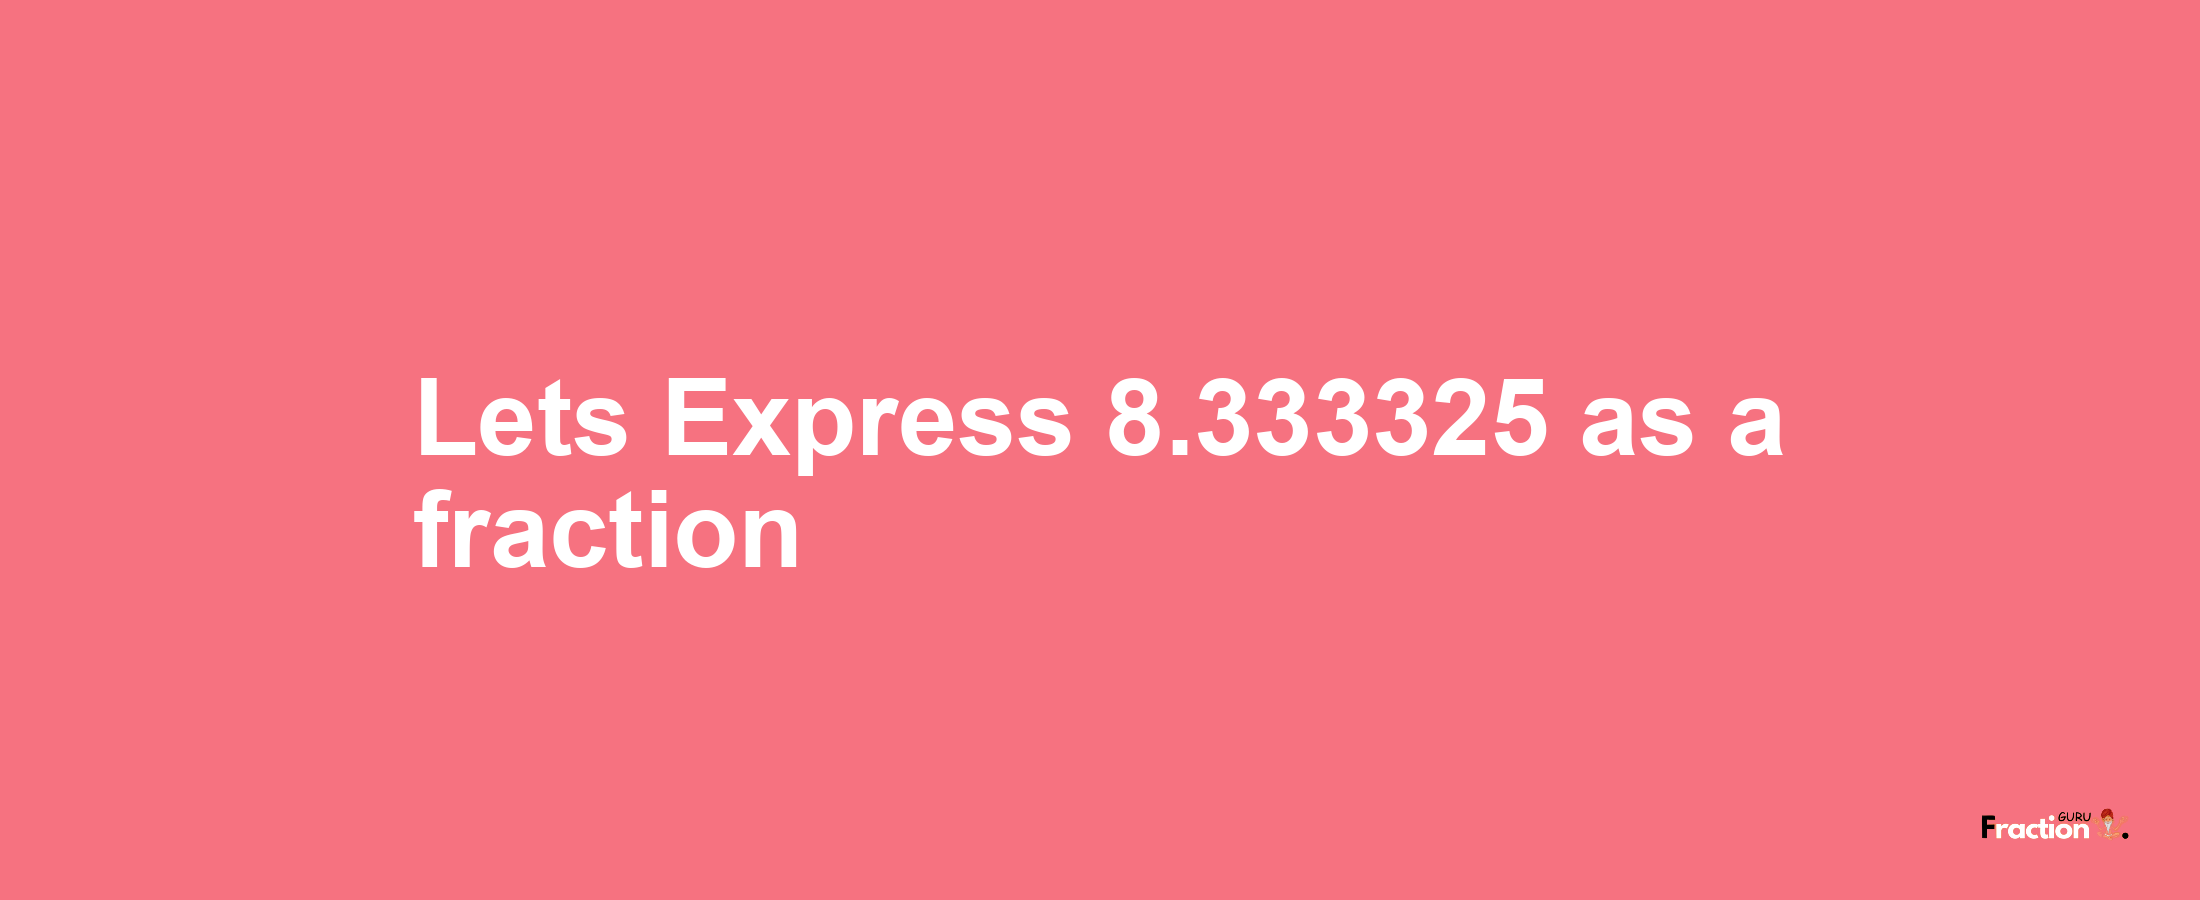 Lets Express 8.333325 as afraction